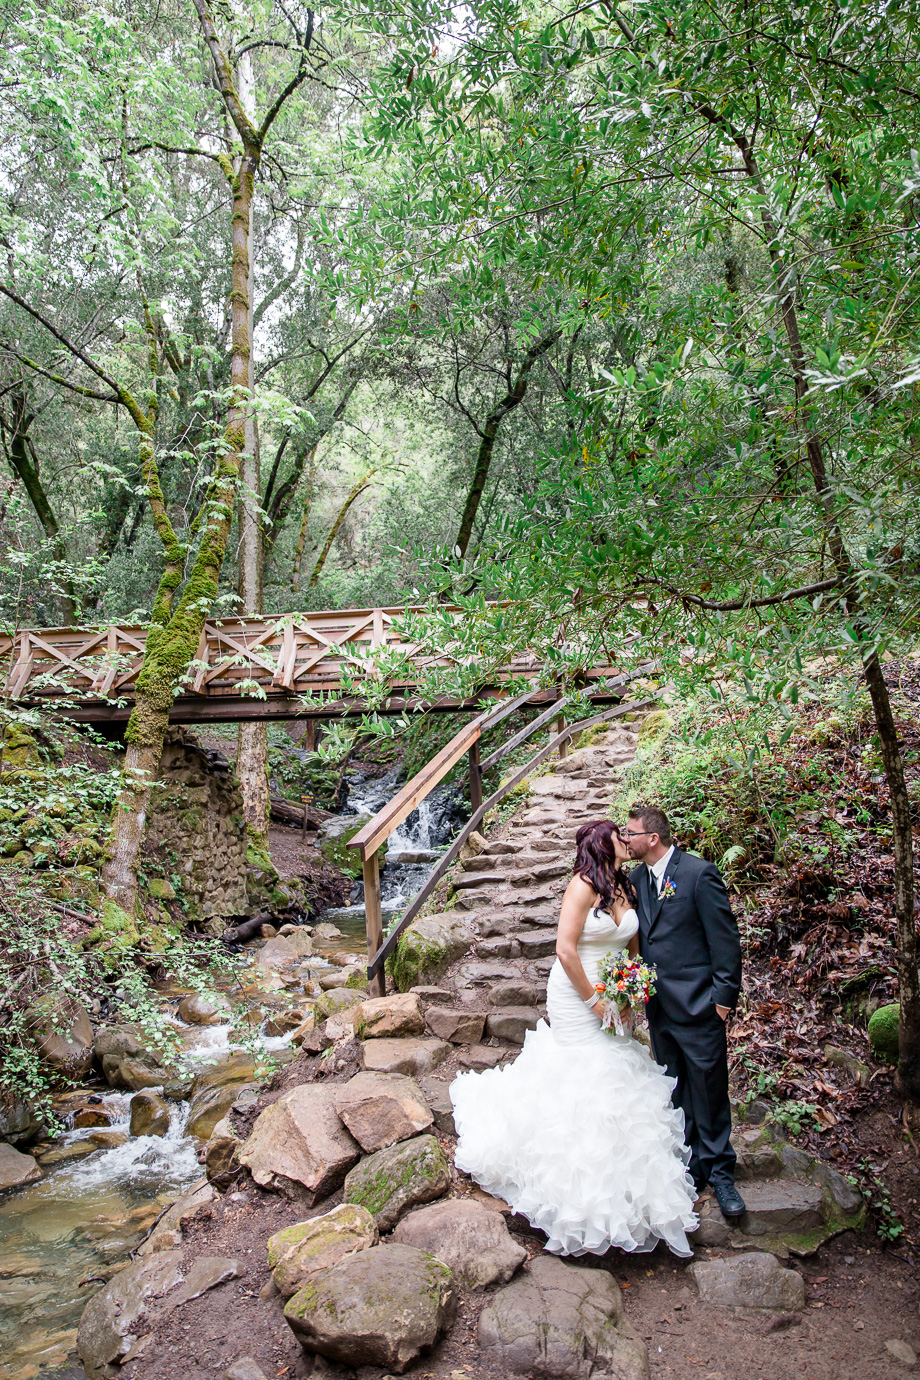 bride and groom wedding portrait by the waterfall in the woods at California Uvas Canyon County Park